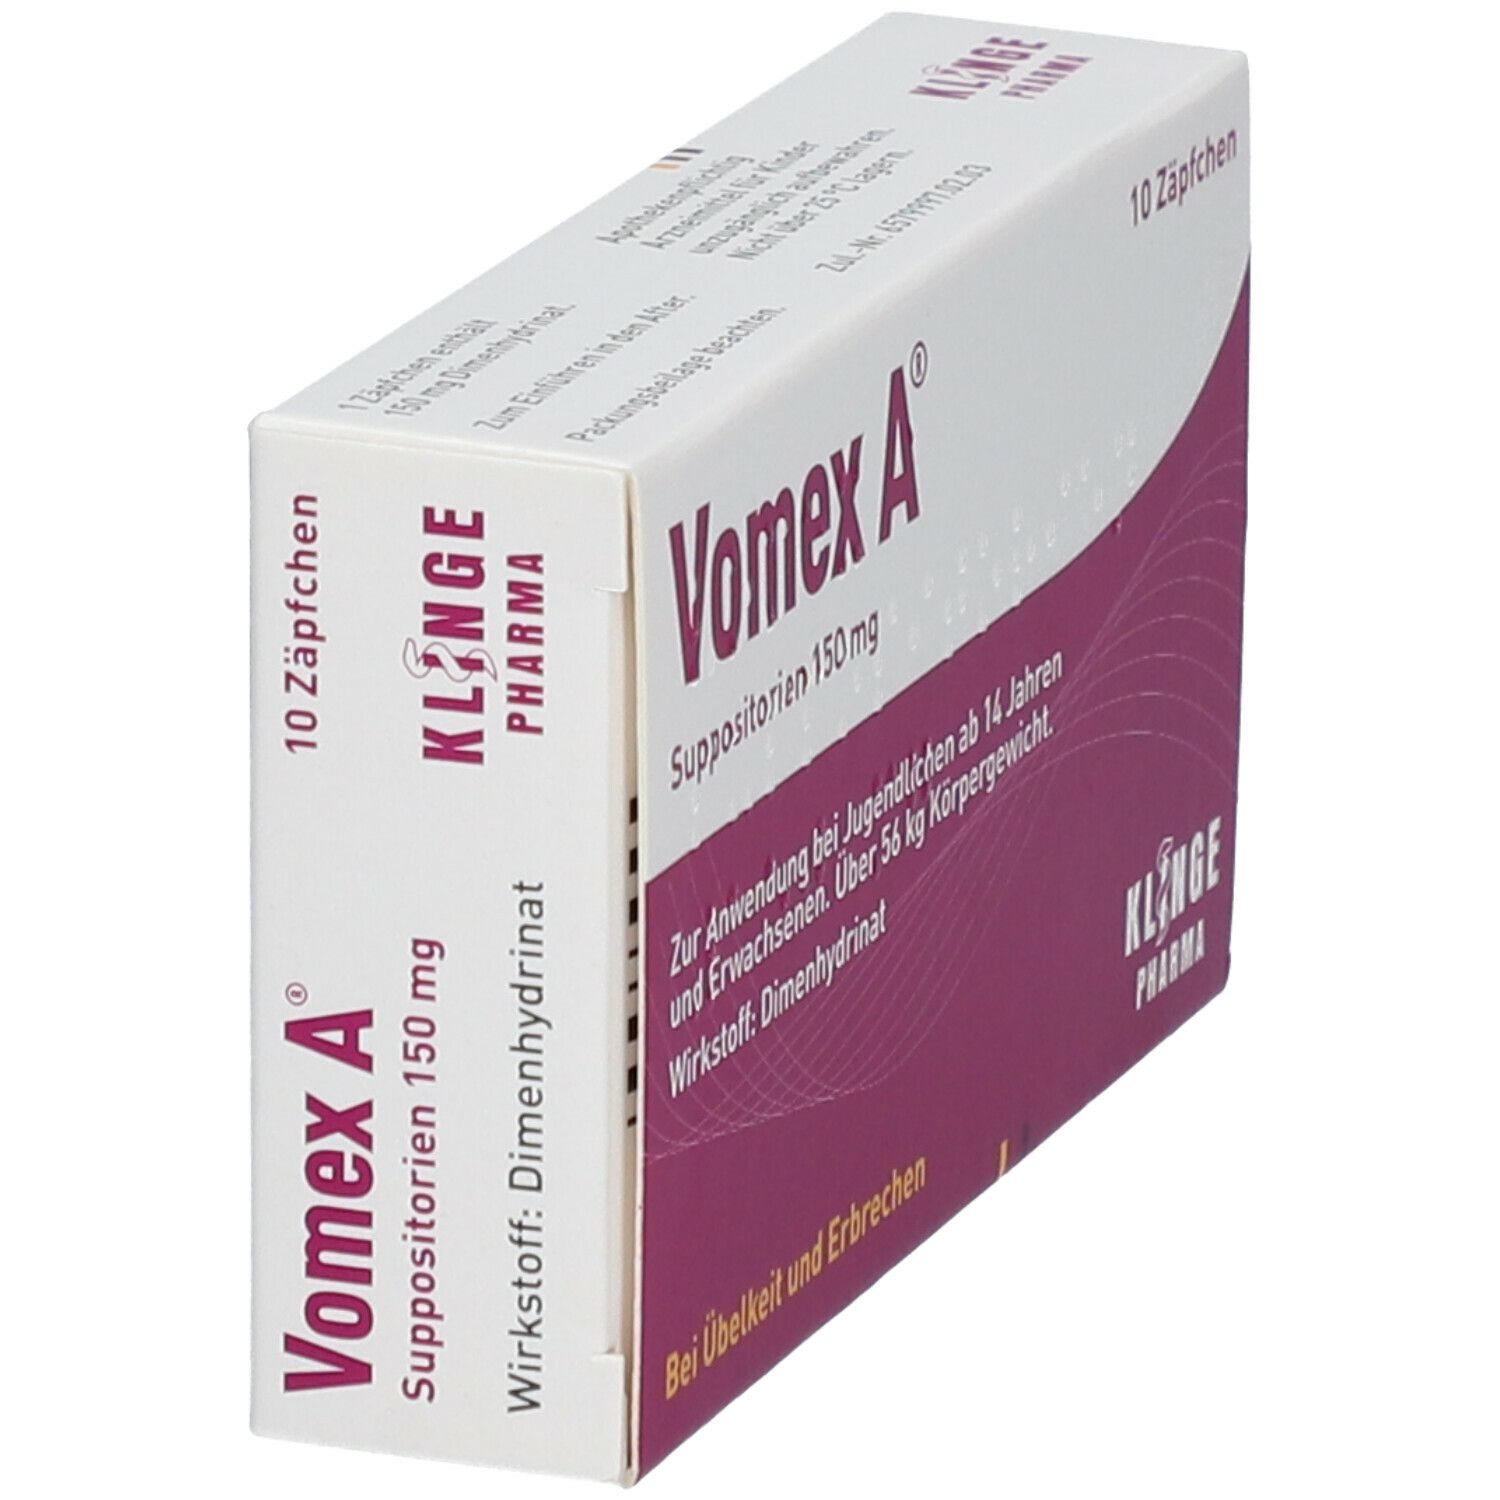 Vomex A® 150 mg